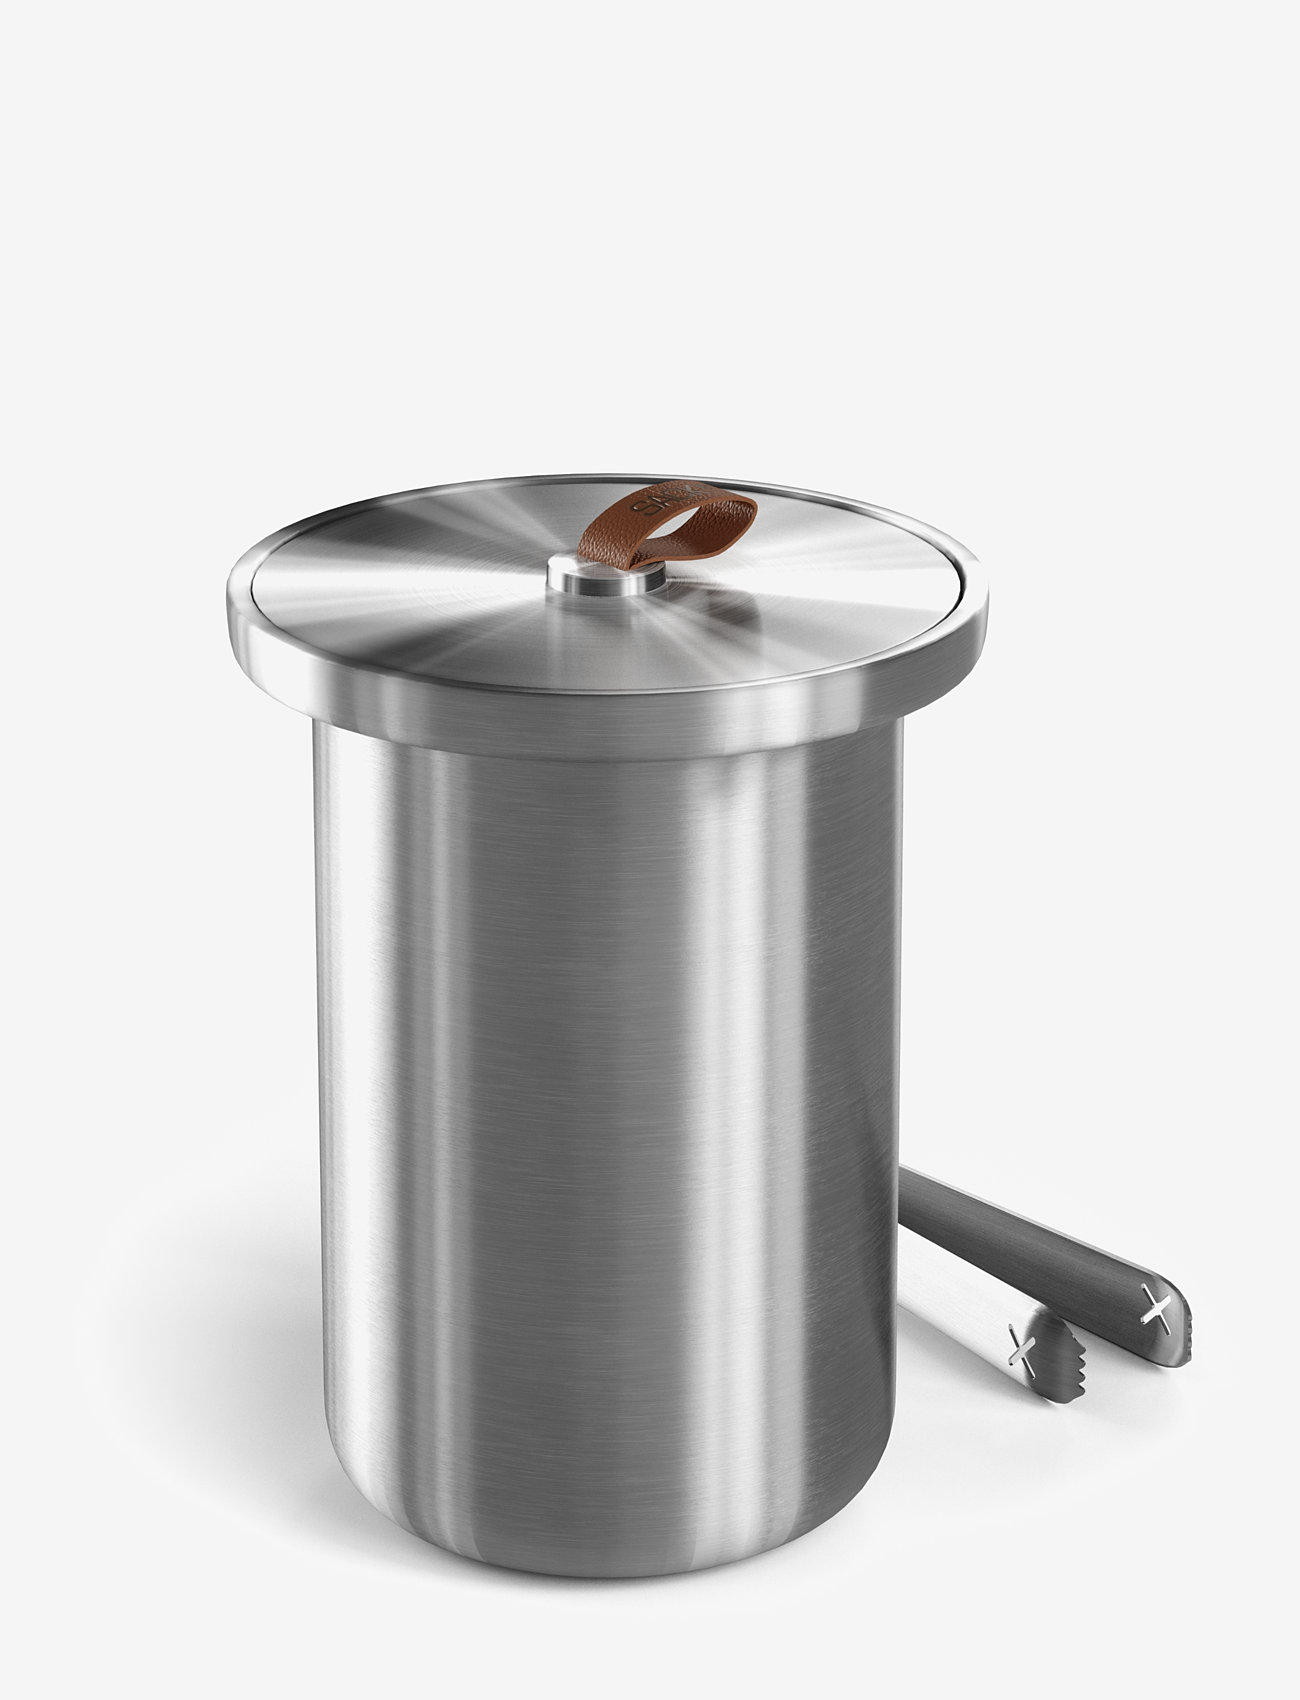 SACKit - Wine Cooler - ijsemmers - stainless steel - 0